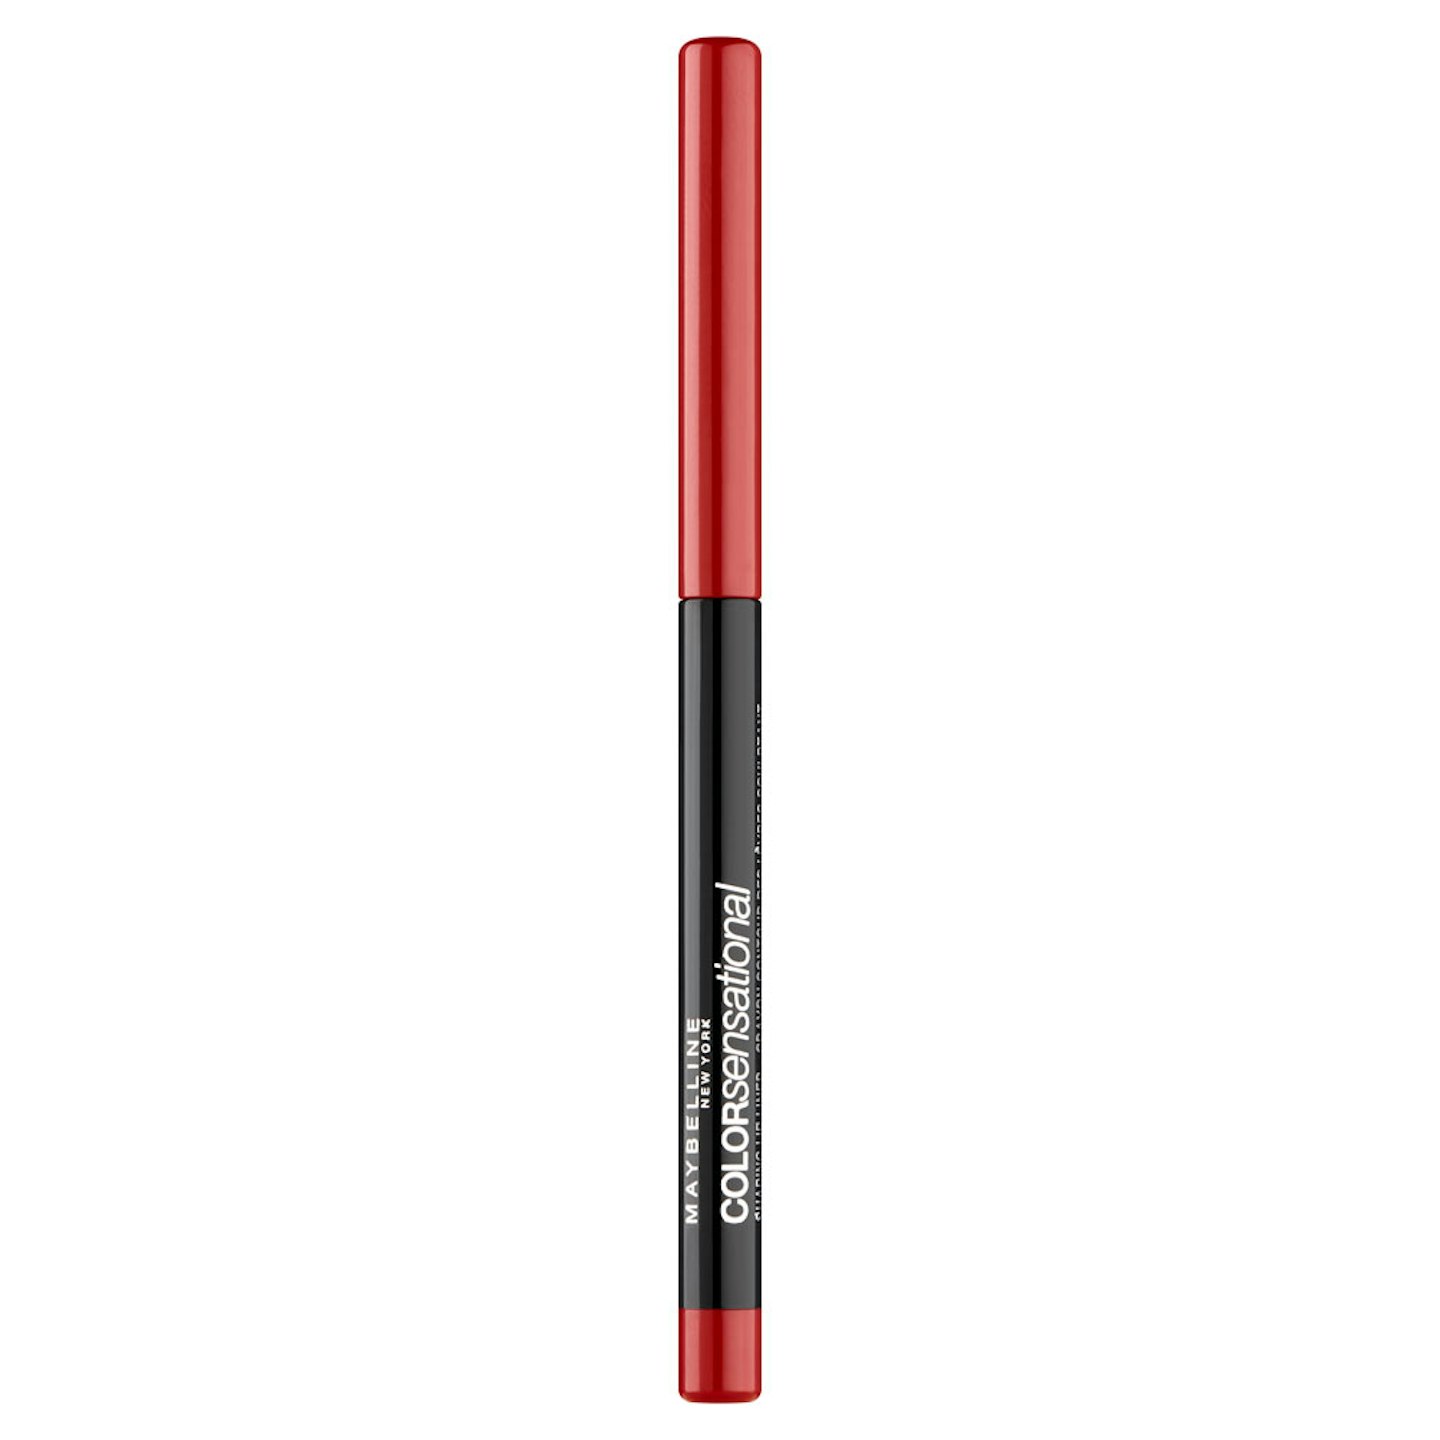 Maybelline Color Sensational Lip Liner in Brick Red, £3.99 from Boots